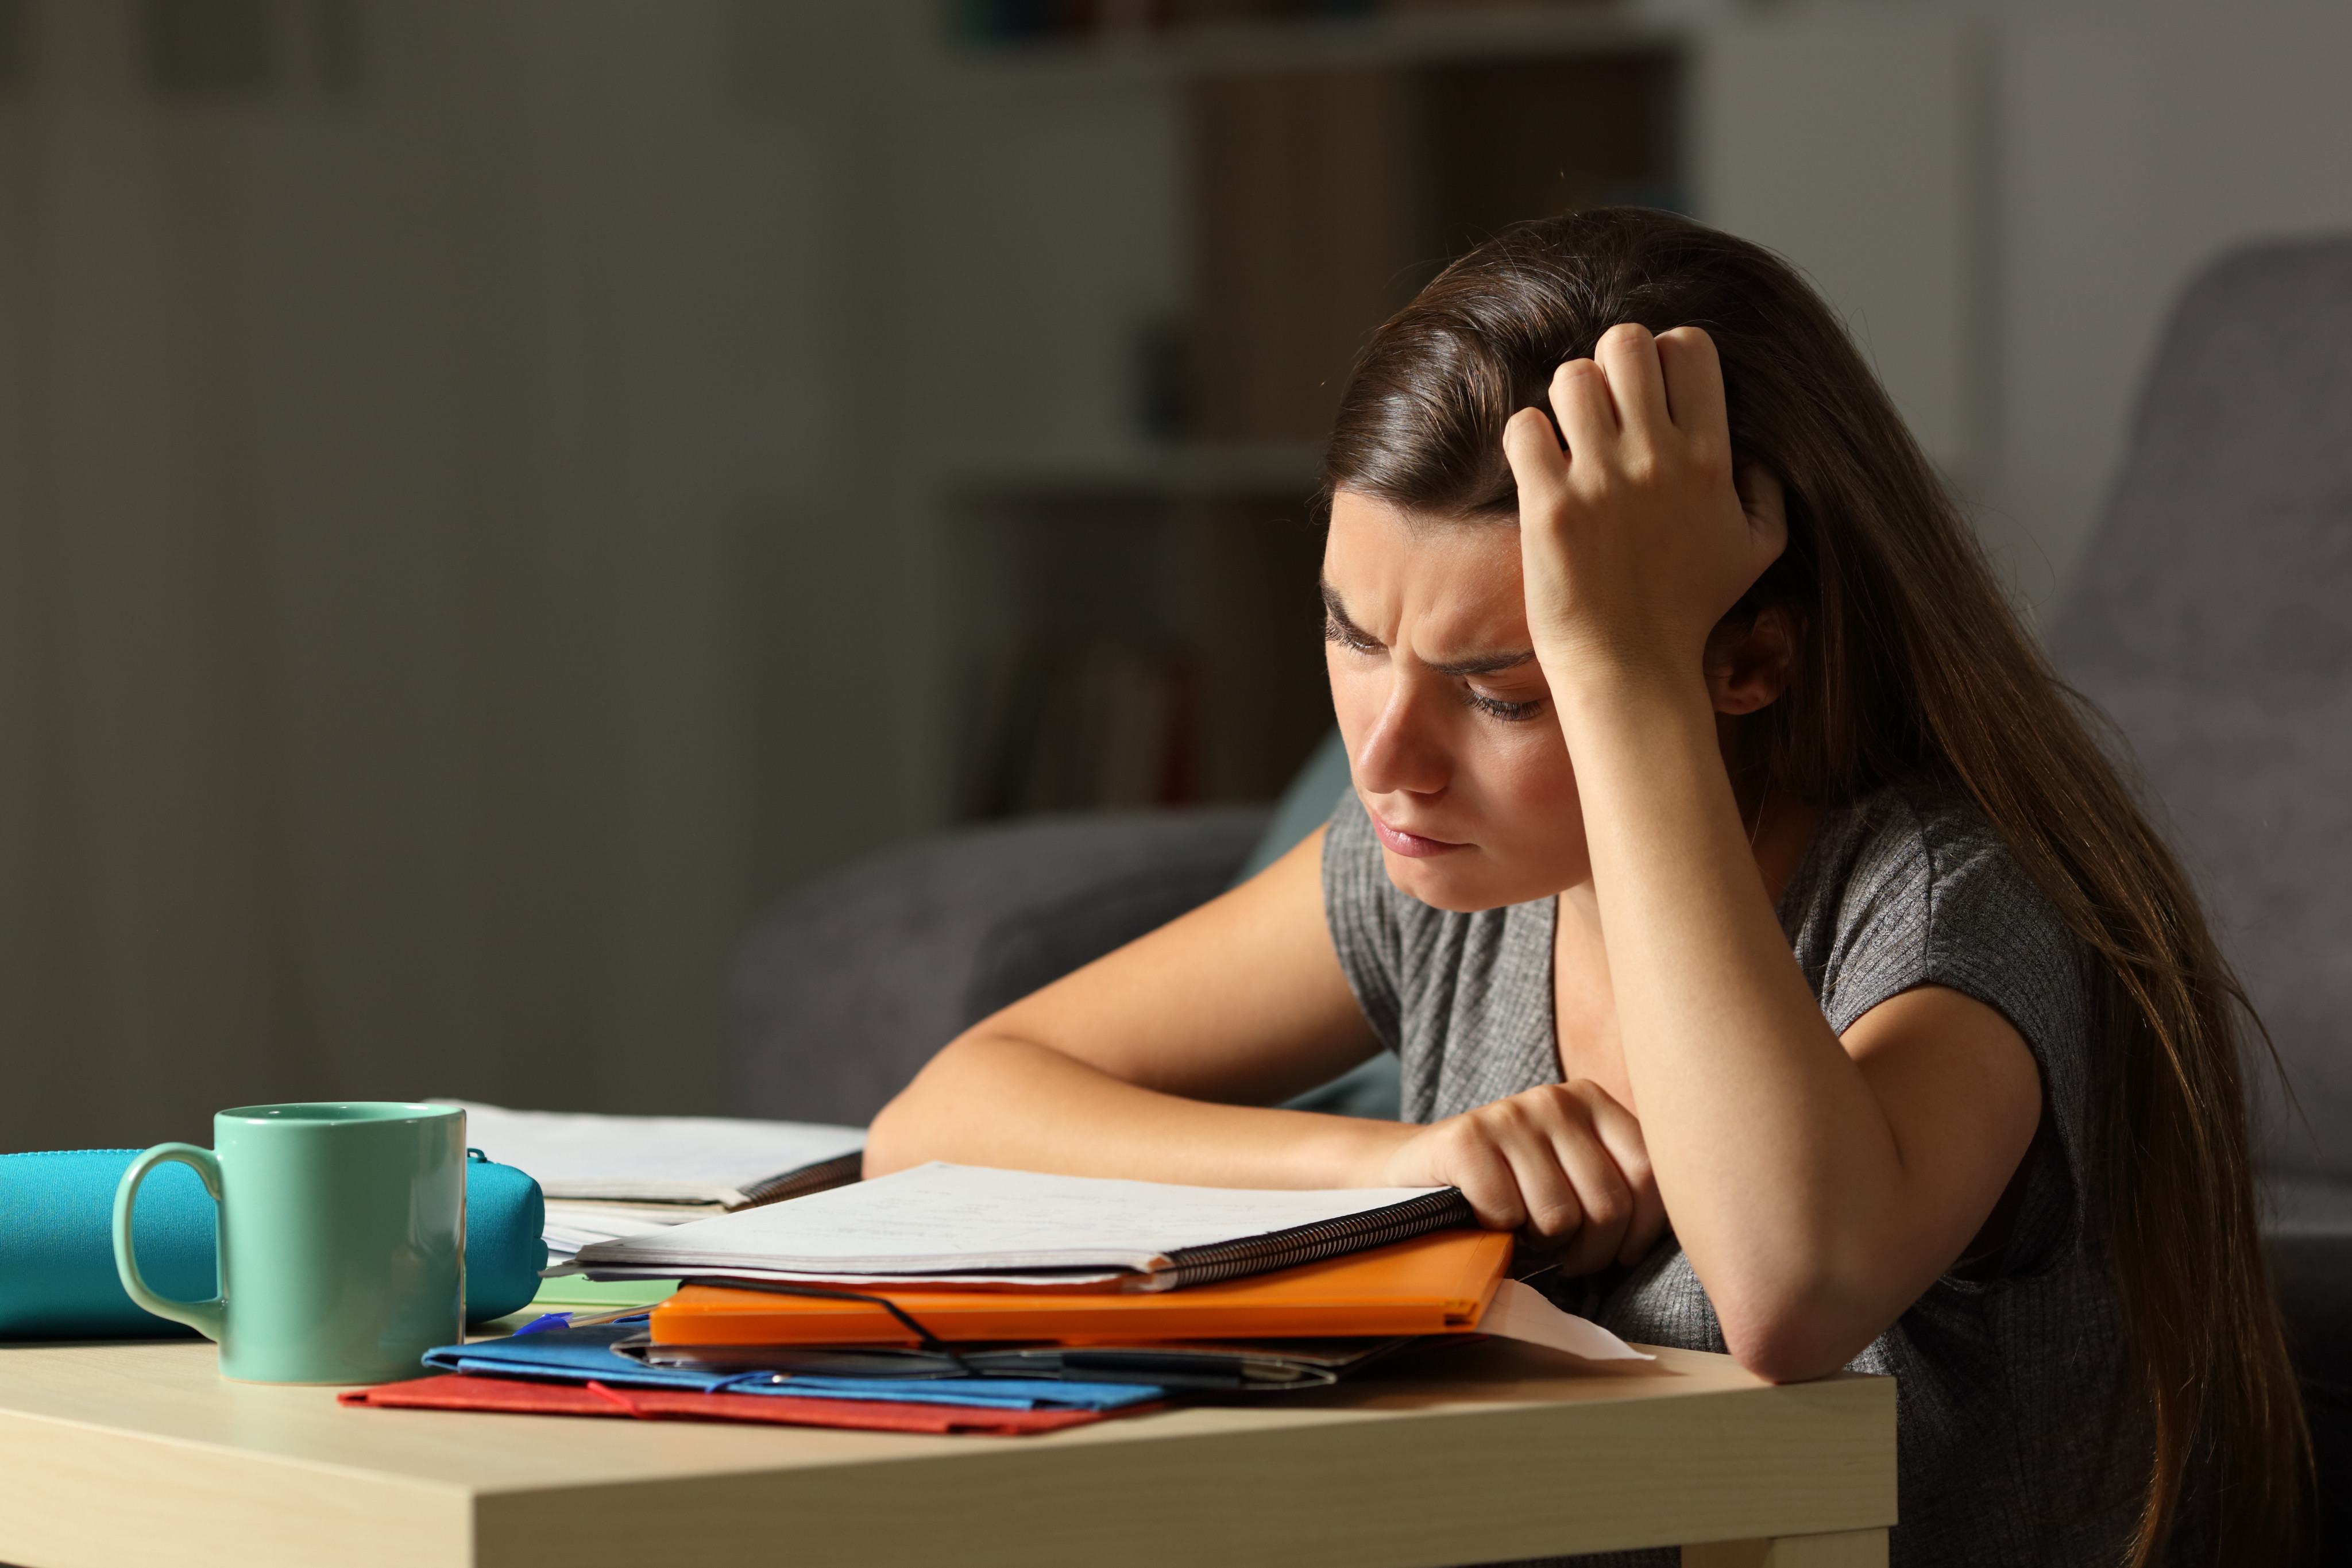 It’s normal to worry about grades and your future, but it’s important to take care of your health. Photo: Shutterstock